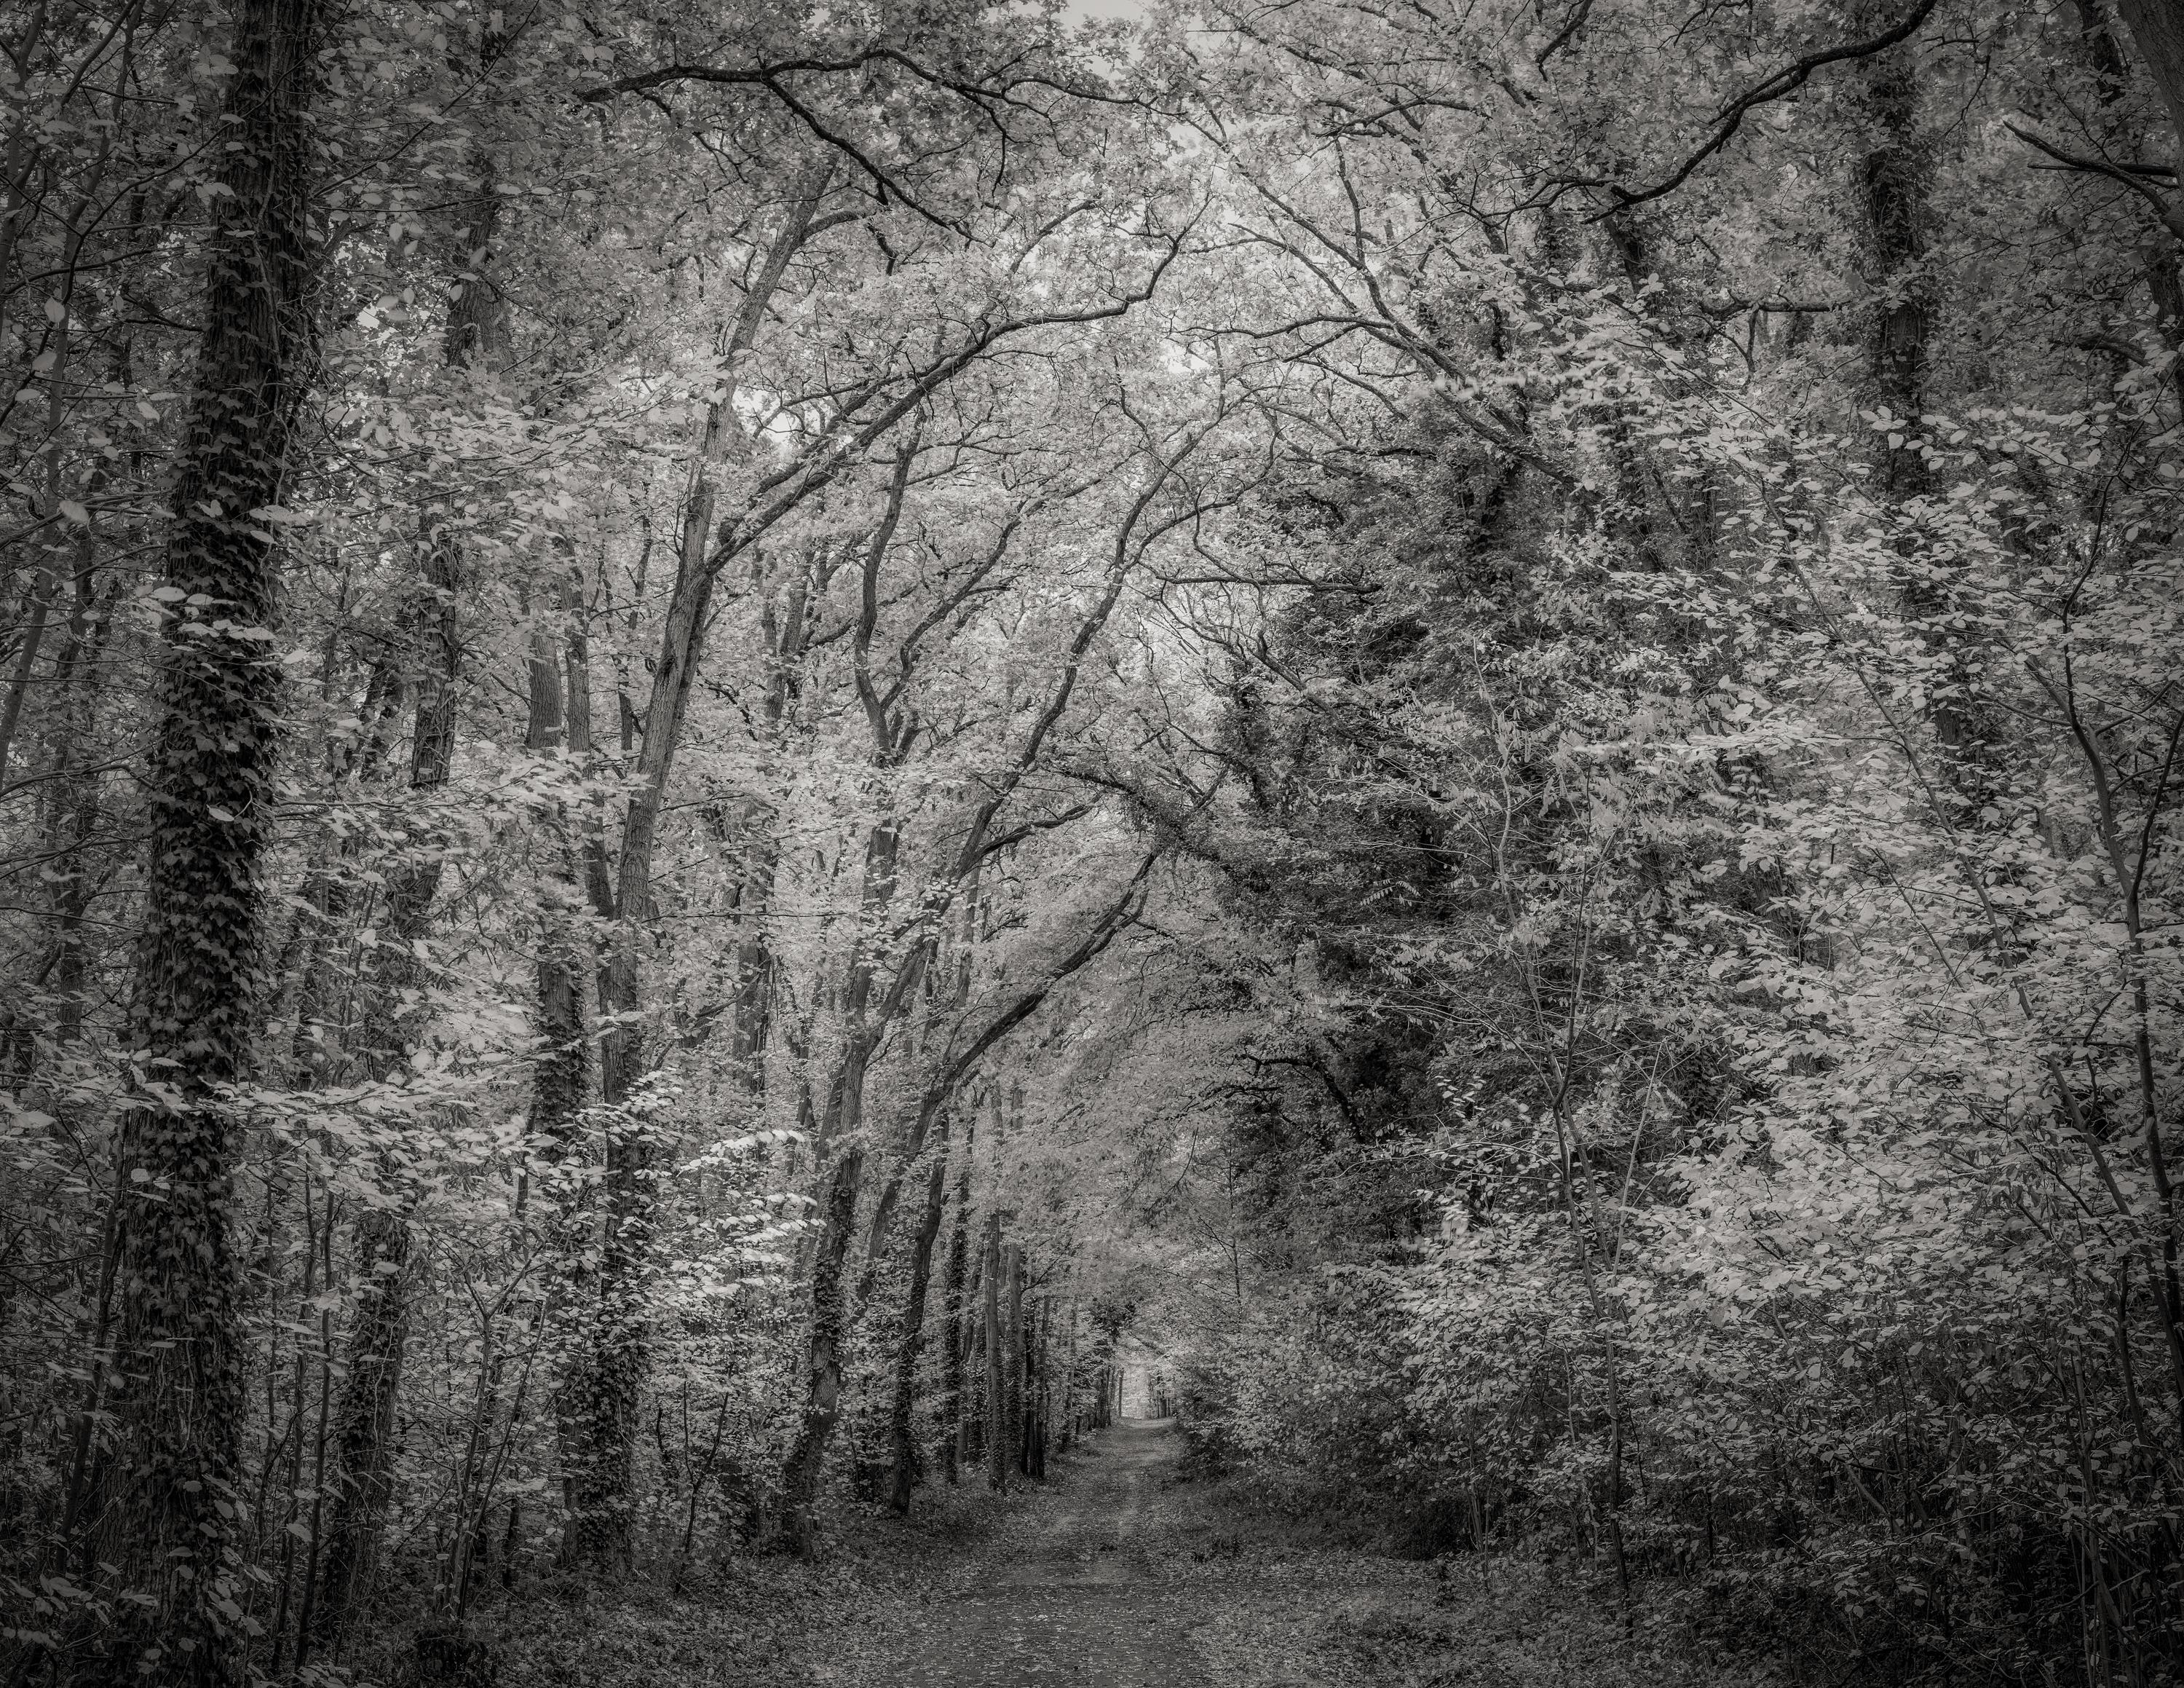 Jeffrey Conley Black and White Photograph - Forest Path, France 2018